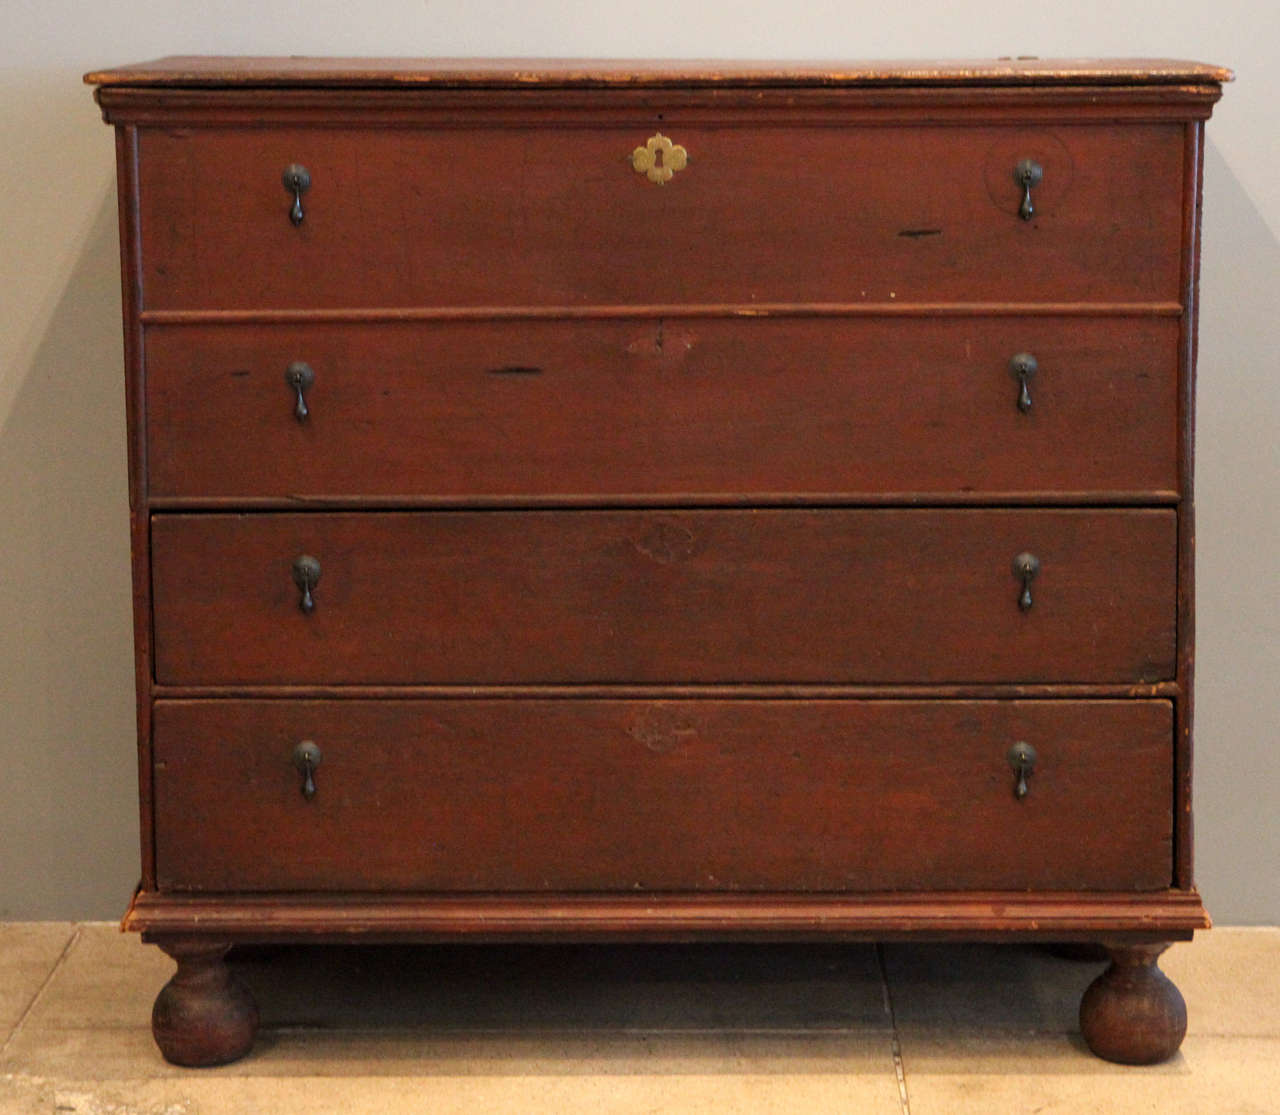 a handsome chest of drawers from new england with two lower drawers and a hidden compartment for the upper two . the original ball shaped feet are pretty exquisite. perfect in a contemporary environment.